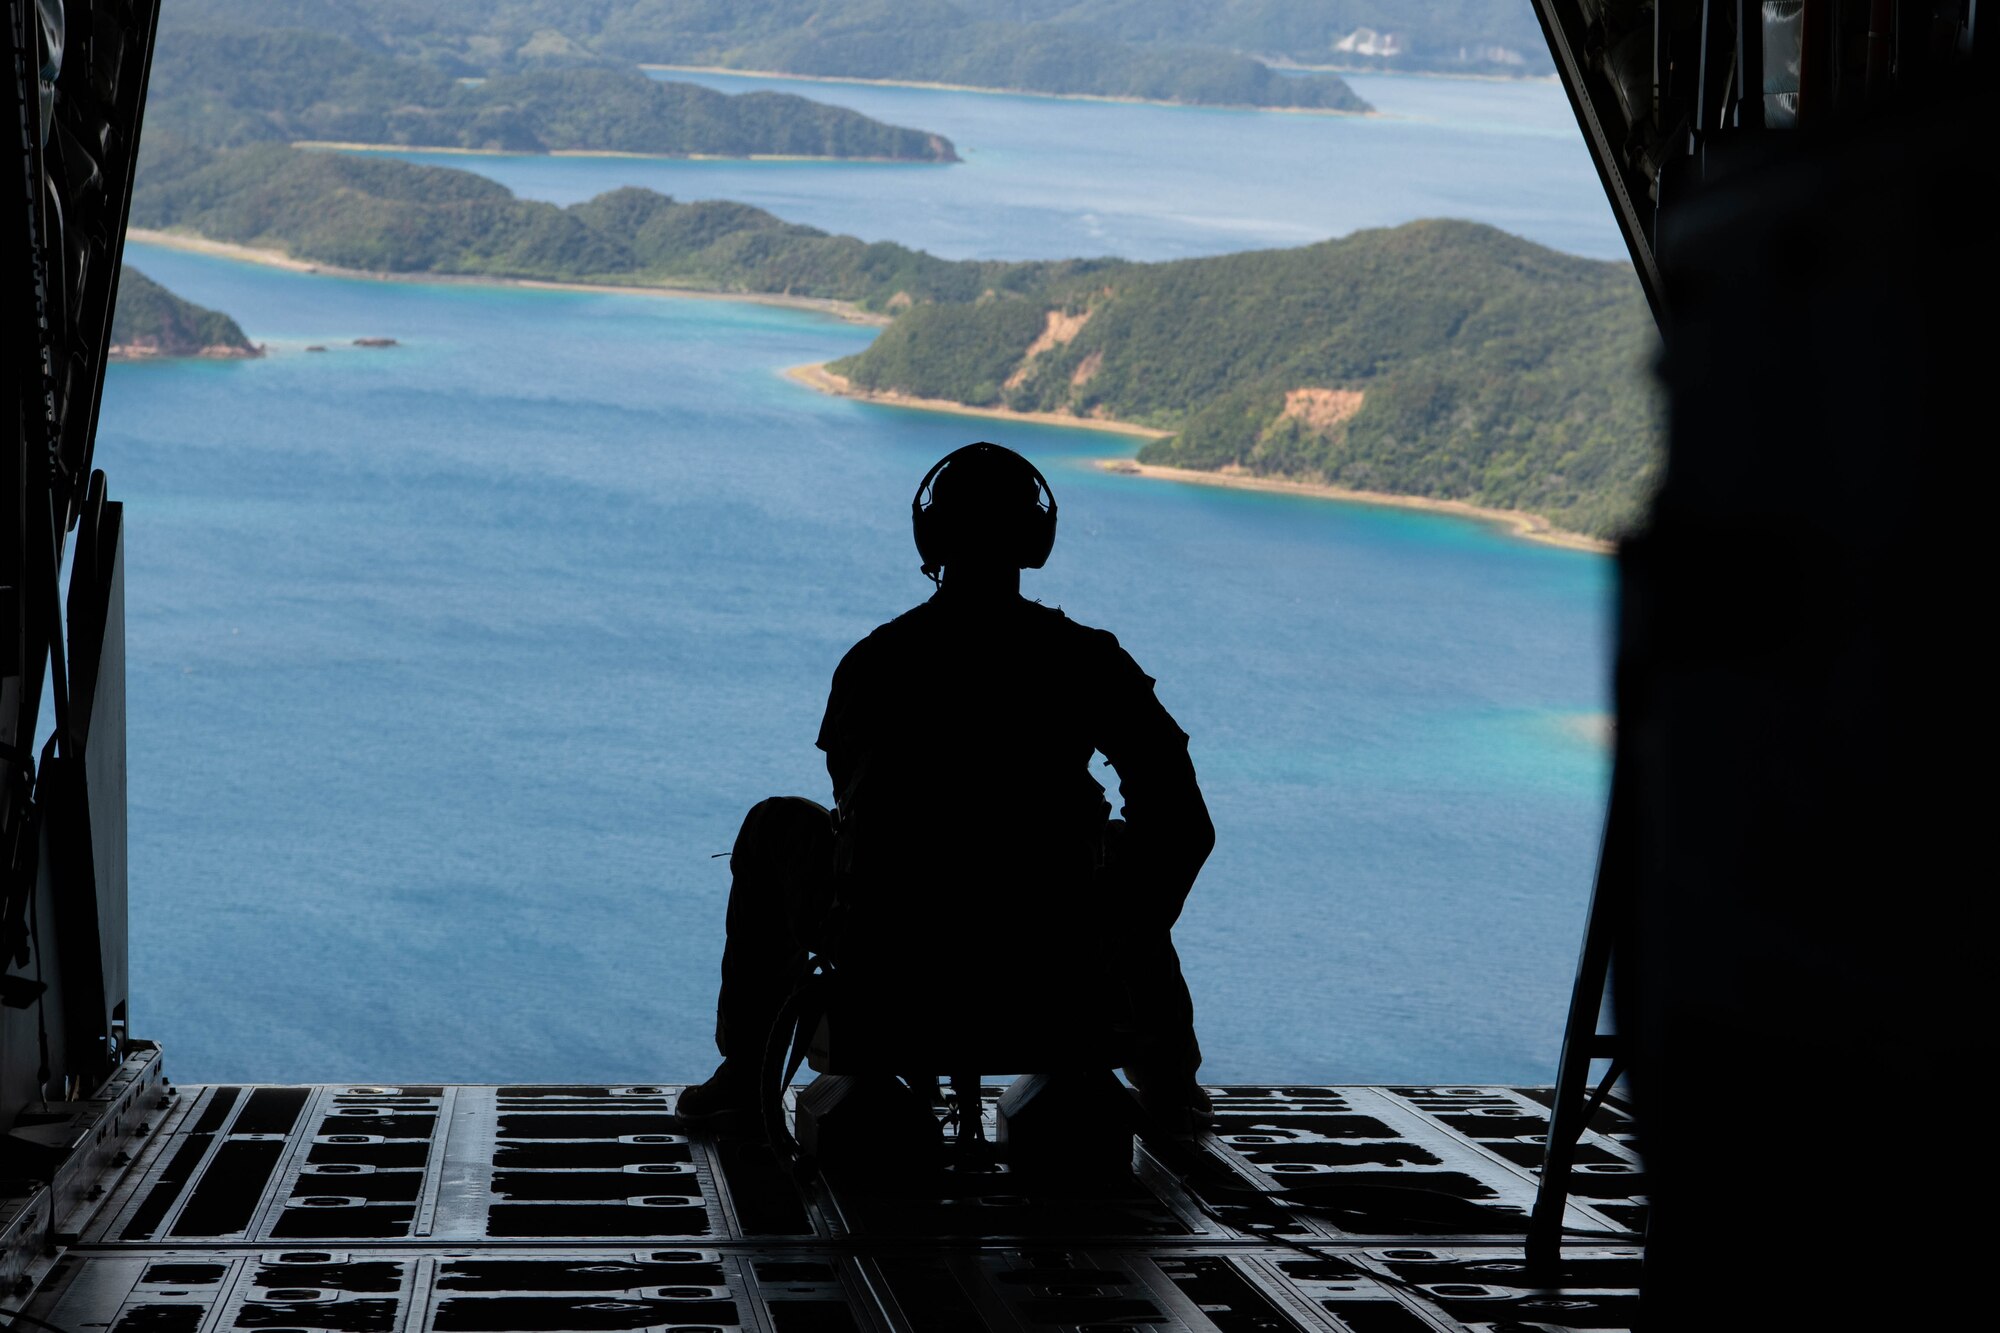 An Airman looks out the back of an aircraft during flight.